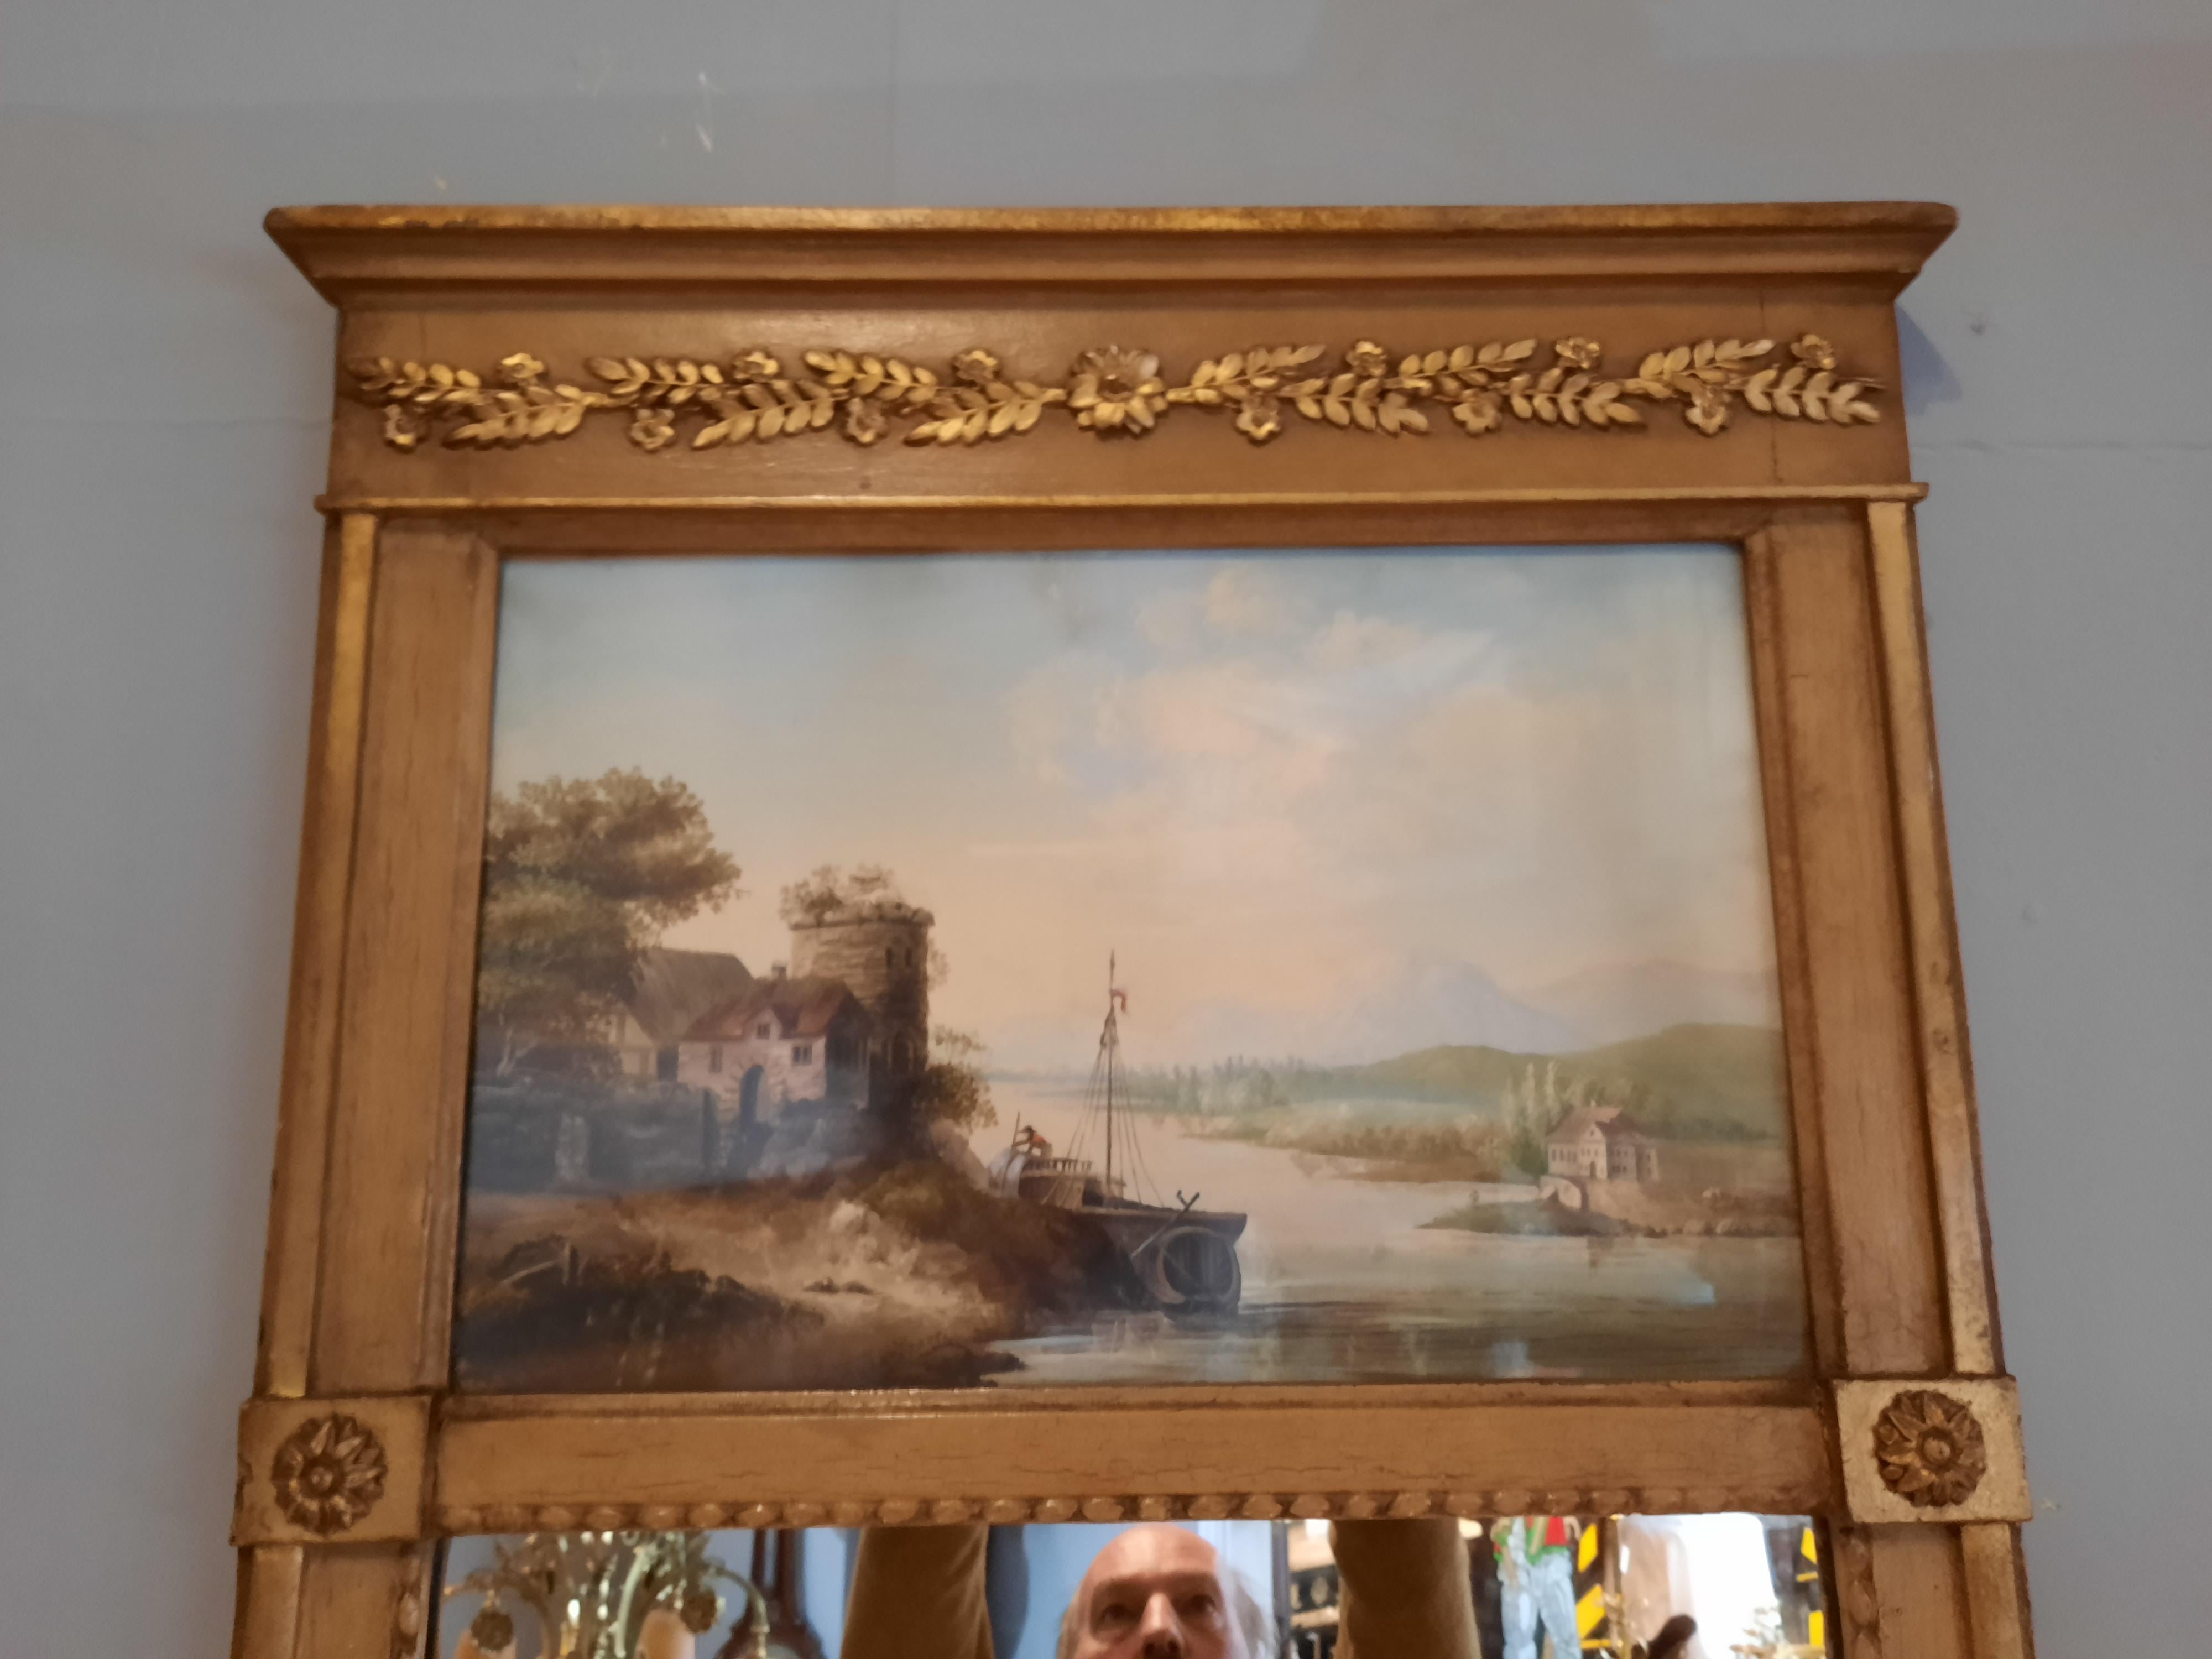 Gilt composite trumeau pier mirror, 19th Century, the frieze with moulded foliate decoration, above painted panel depicting a riverboat set within a landscape with mountains, above rectangular mirror plate, with bead moulded border and applied